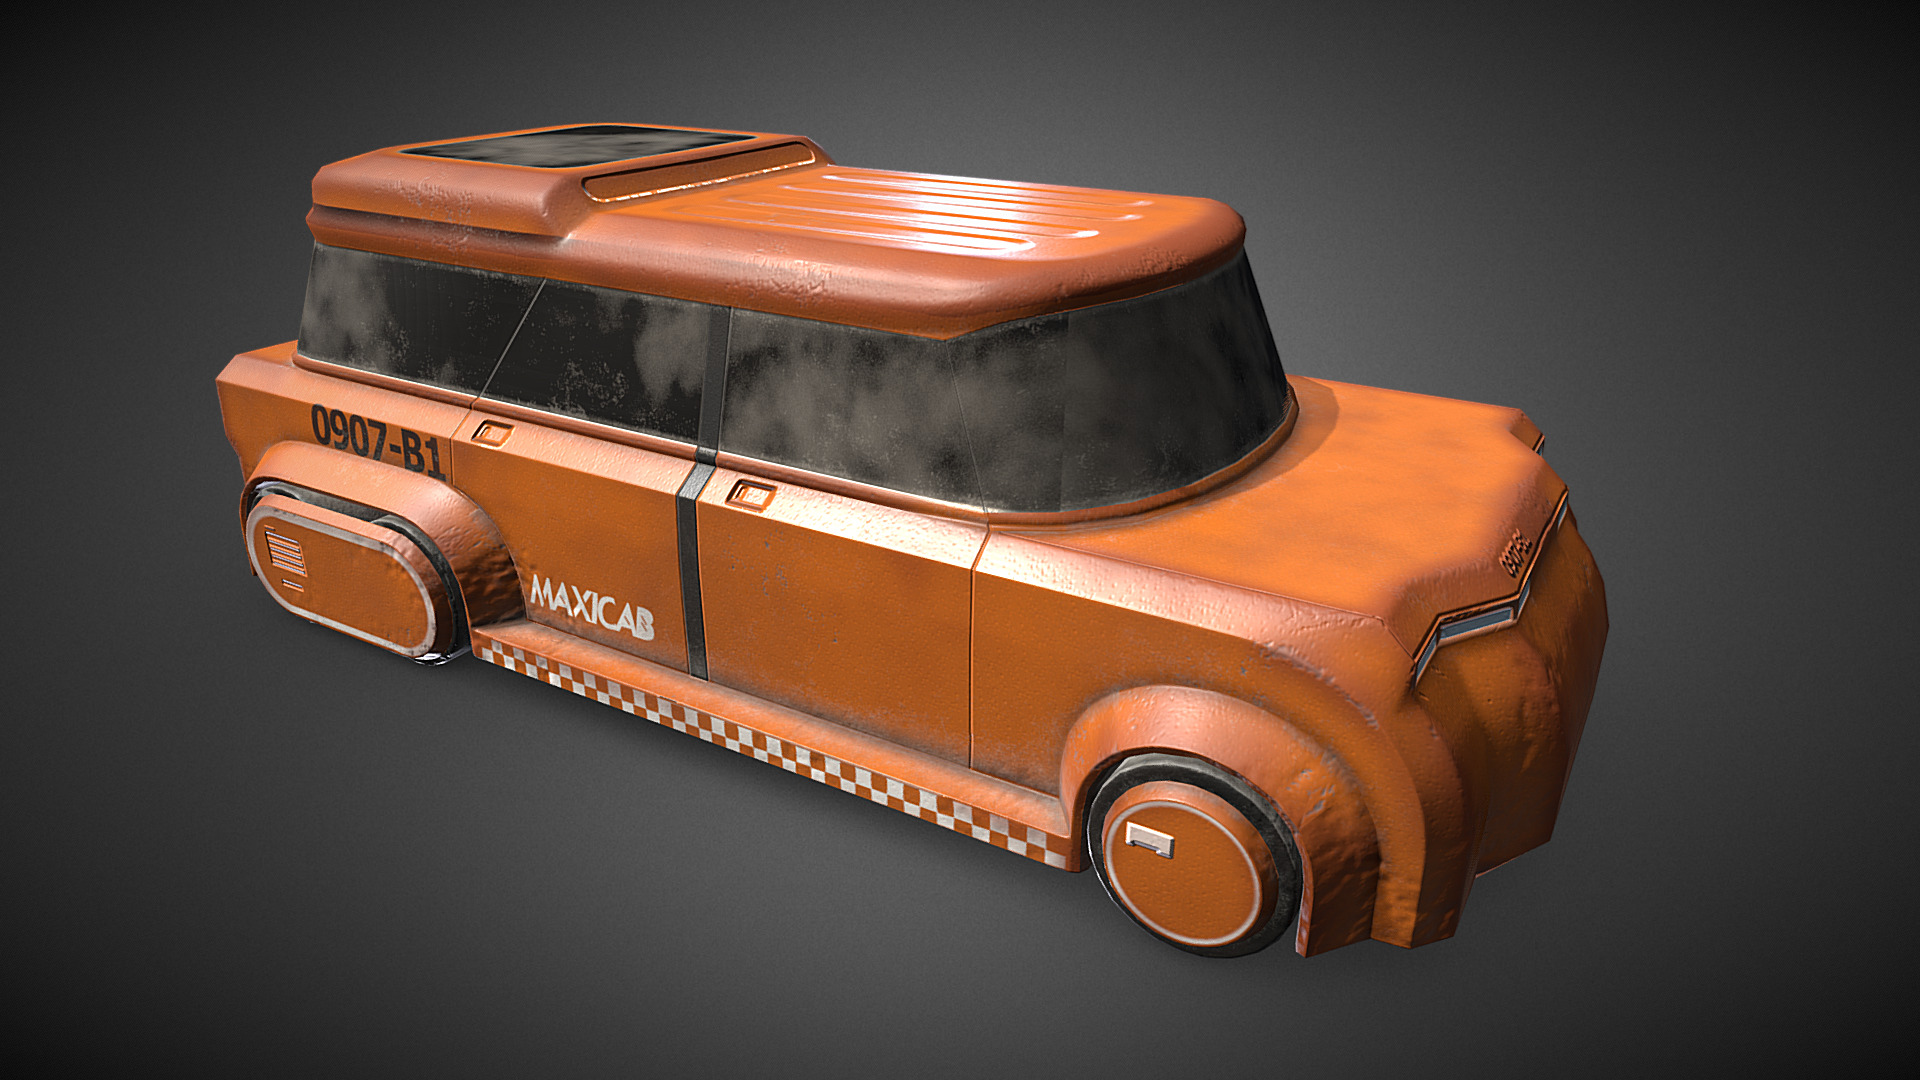 3D model Cyberpunk taxi – Maxicab - This is a 3D model of the Cyberpunk taxi - Maxicab. The 3D model is about a brown leather case.